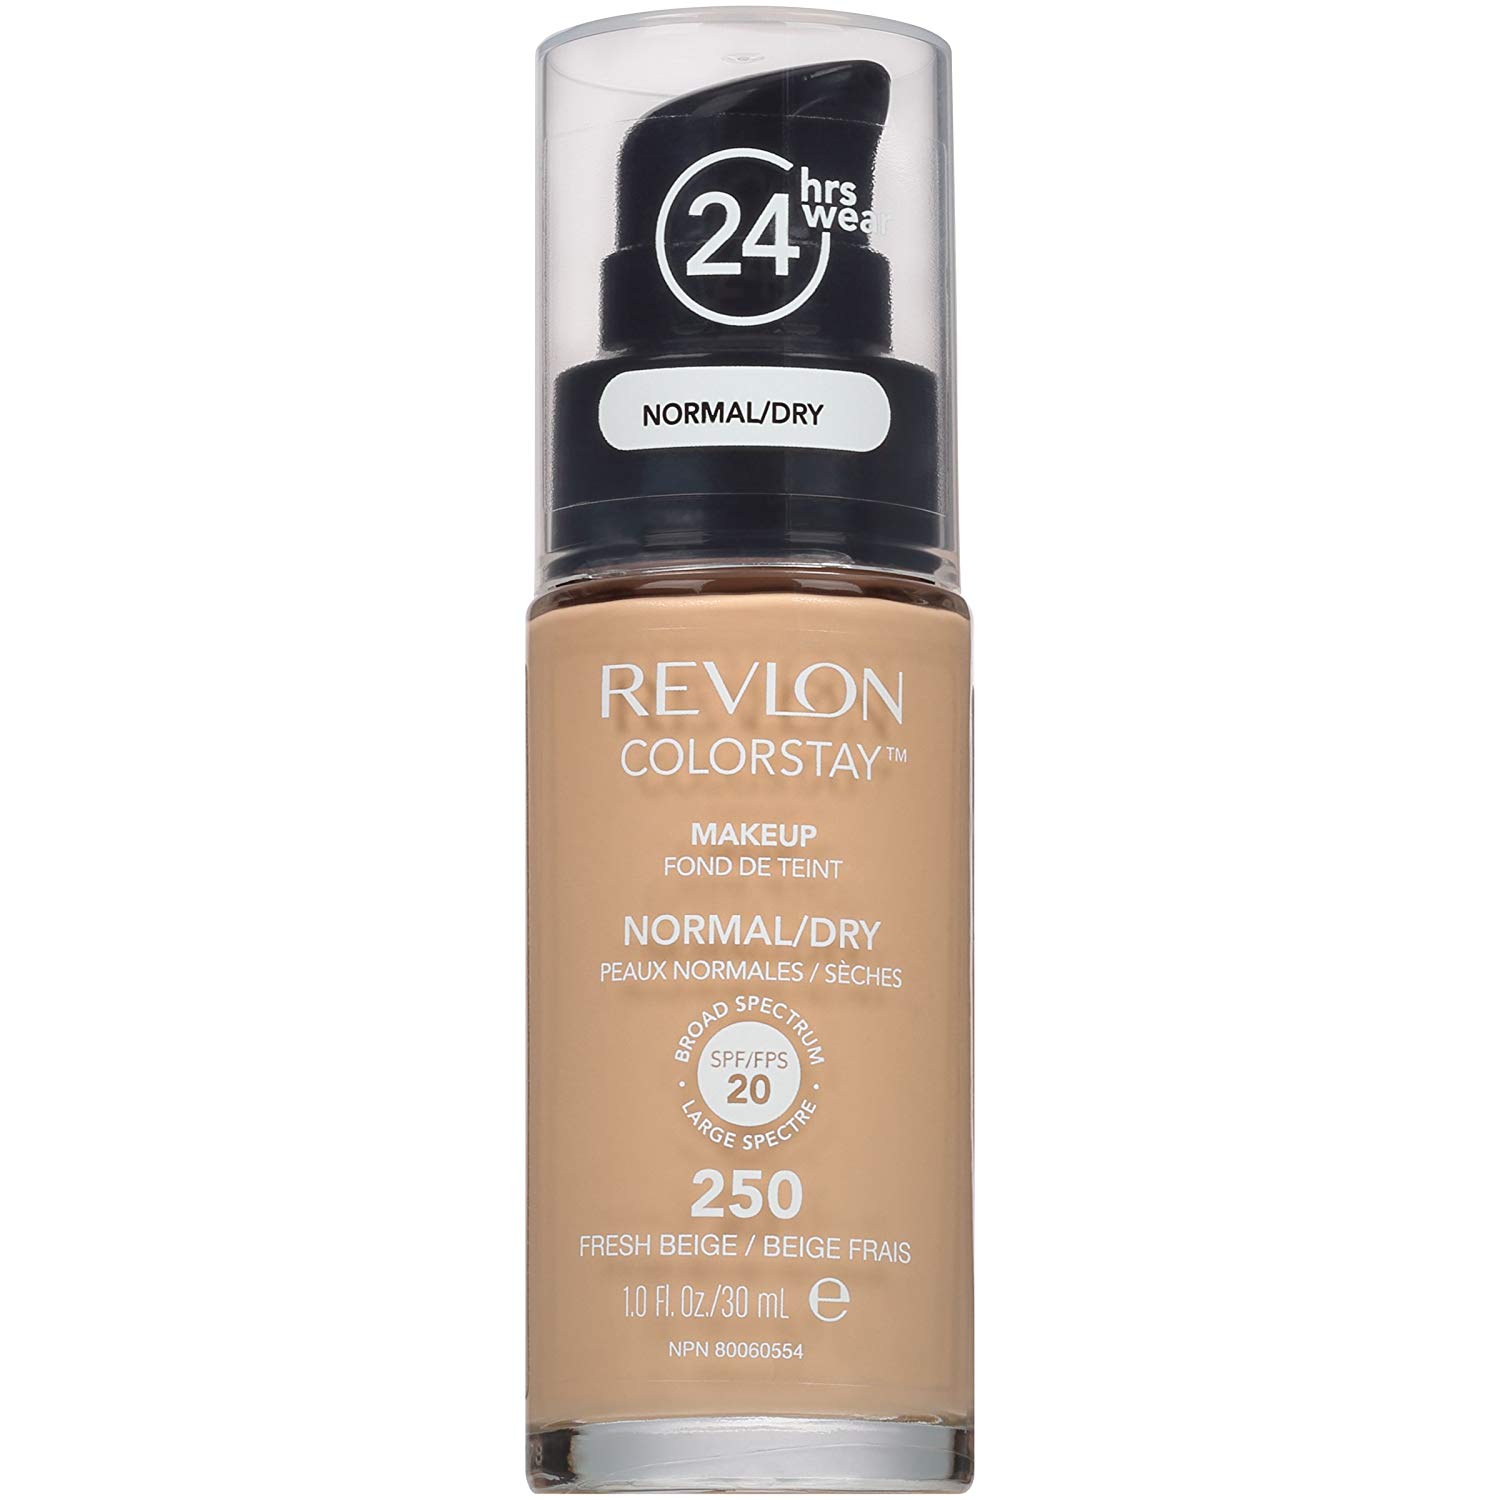 kem-nen-revlon-colorstay-foundation-normal-dry-review-thanh-phan-gia-cong-dung